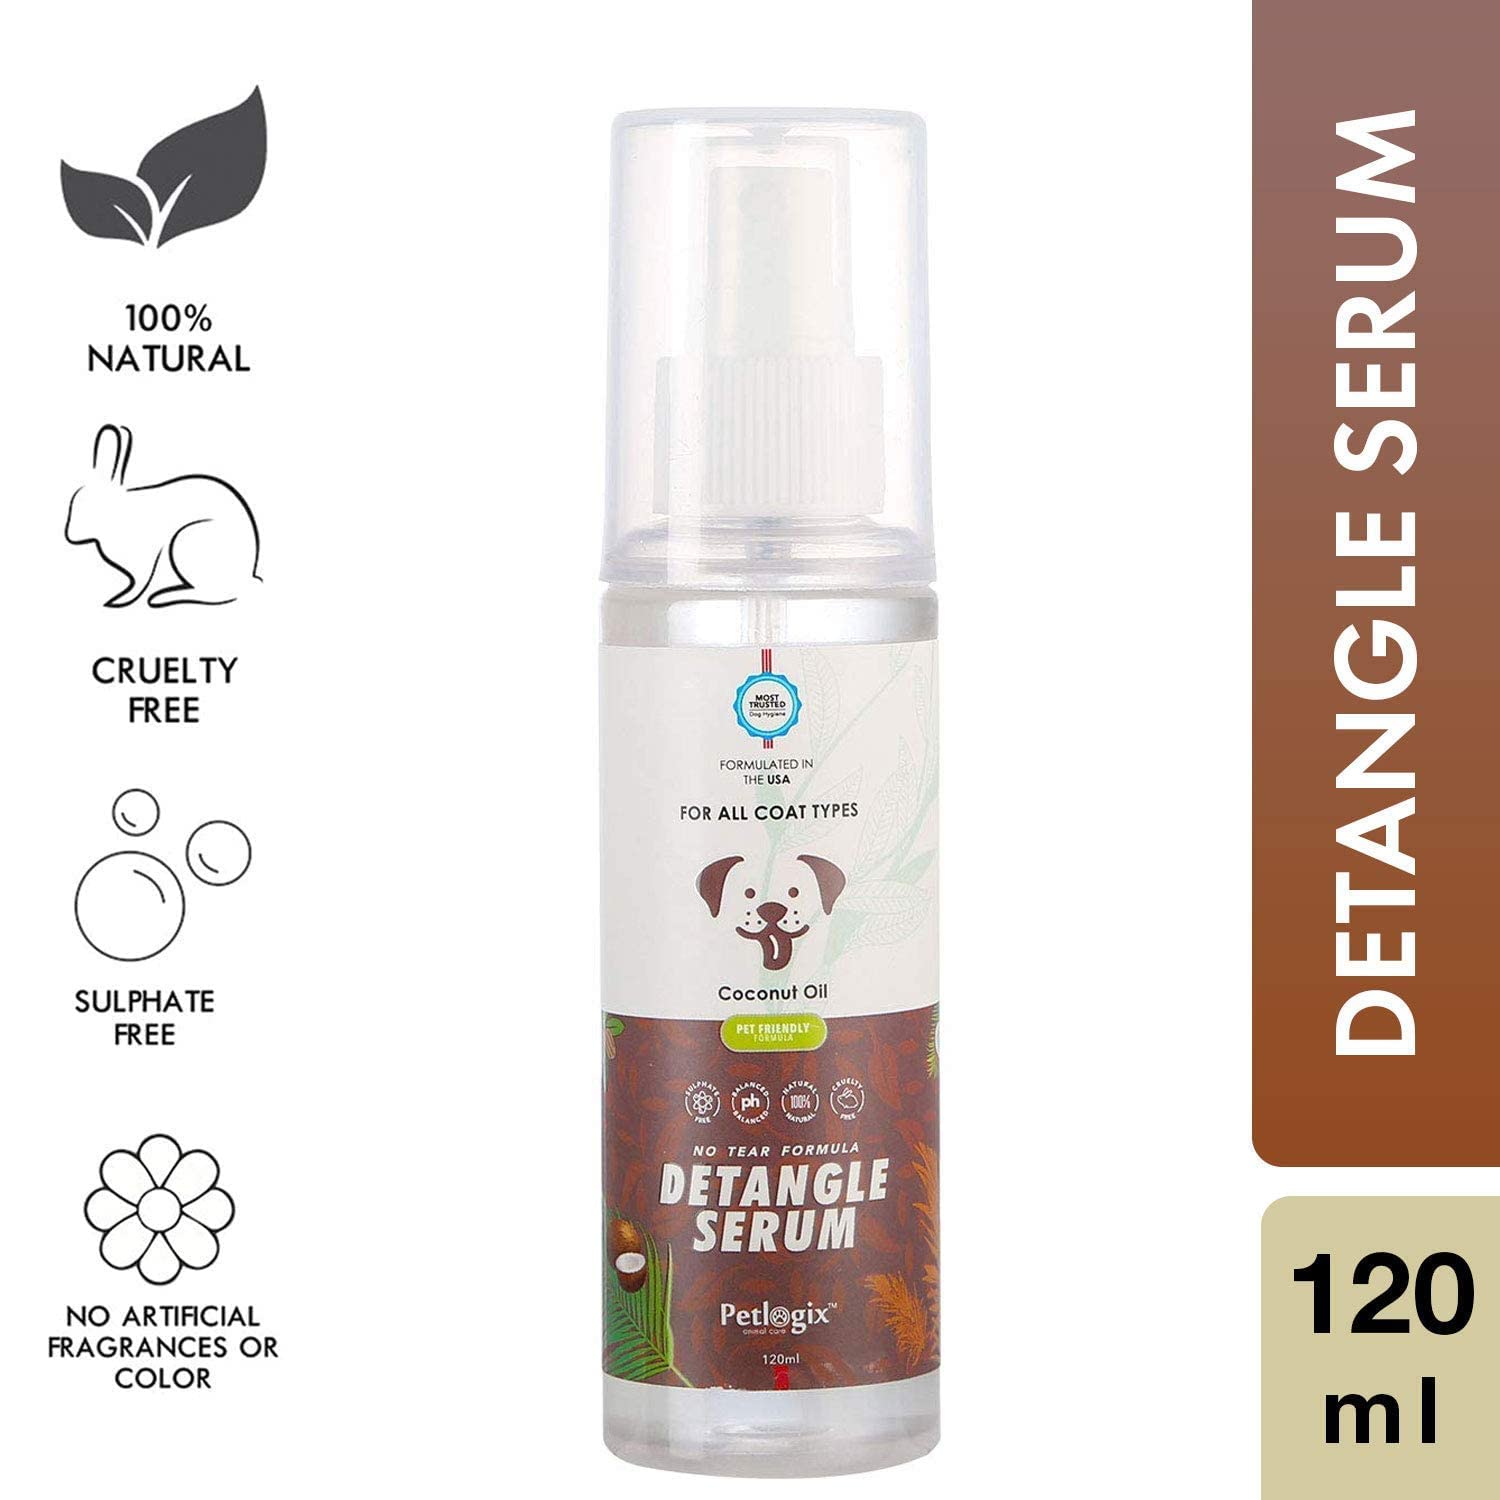 Petlogix 4 in 1 The After Care Kit Pawfect Butter Detangle Serum Green Tea K9 Mist Breath Freshener Spray for Dogs and Puppies